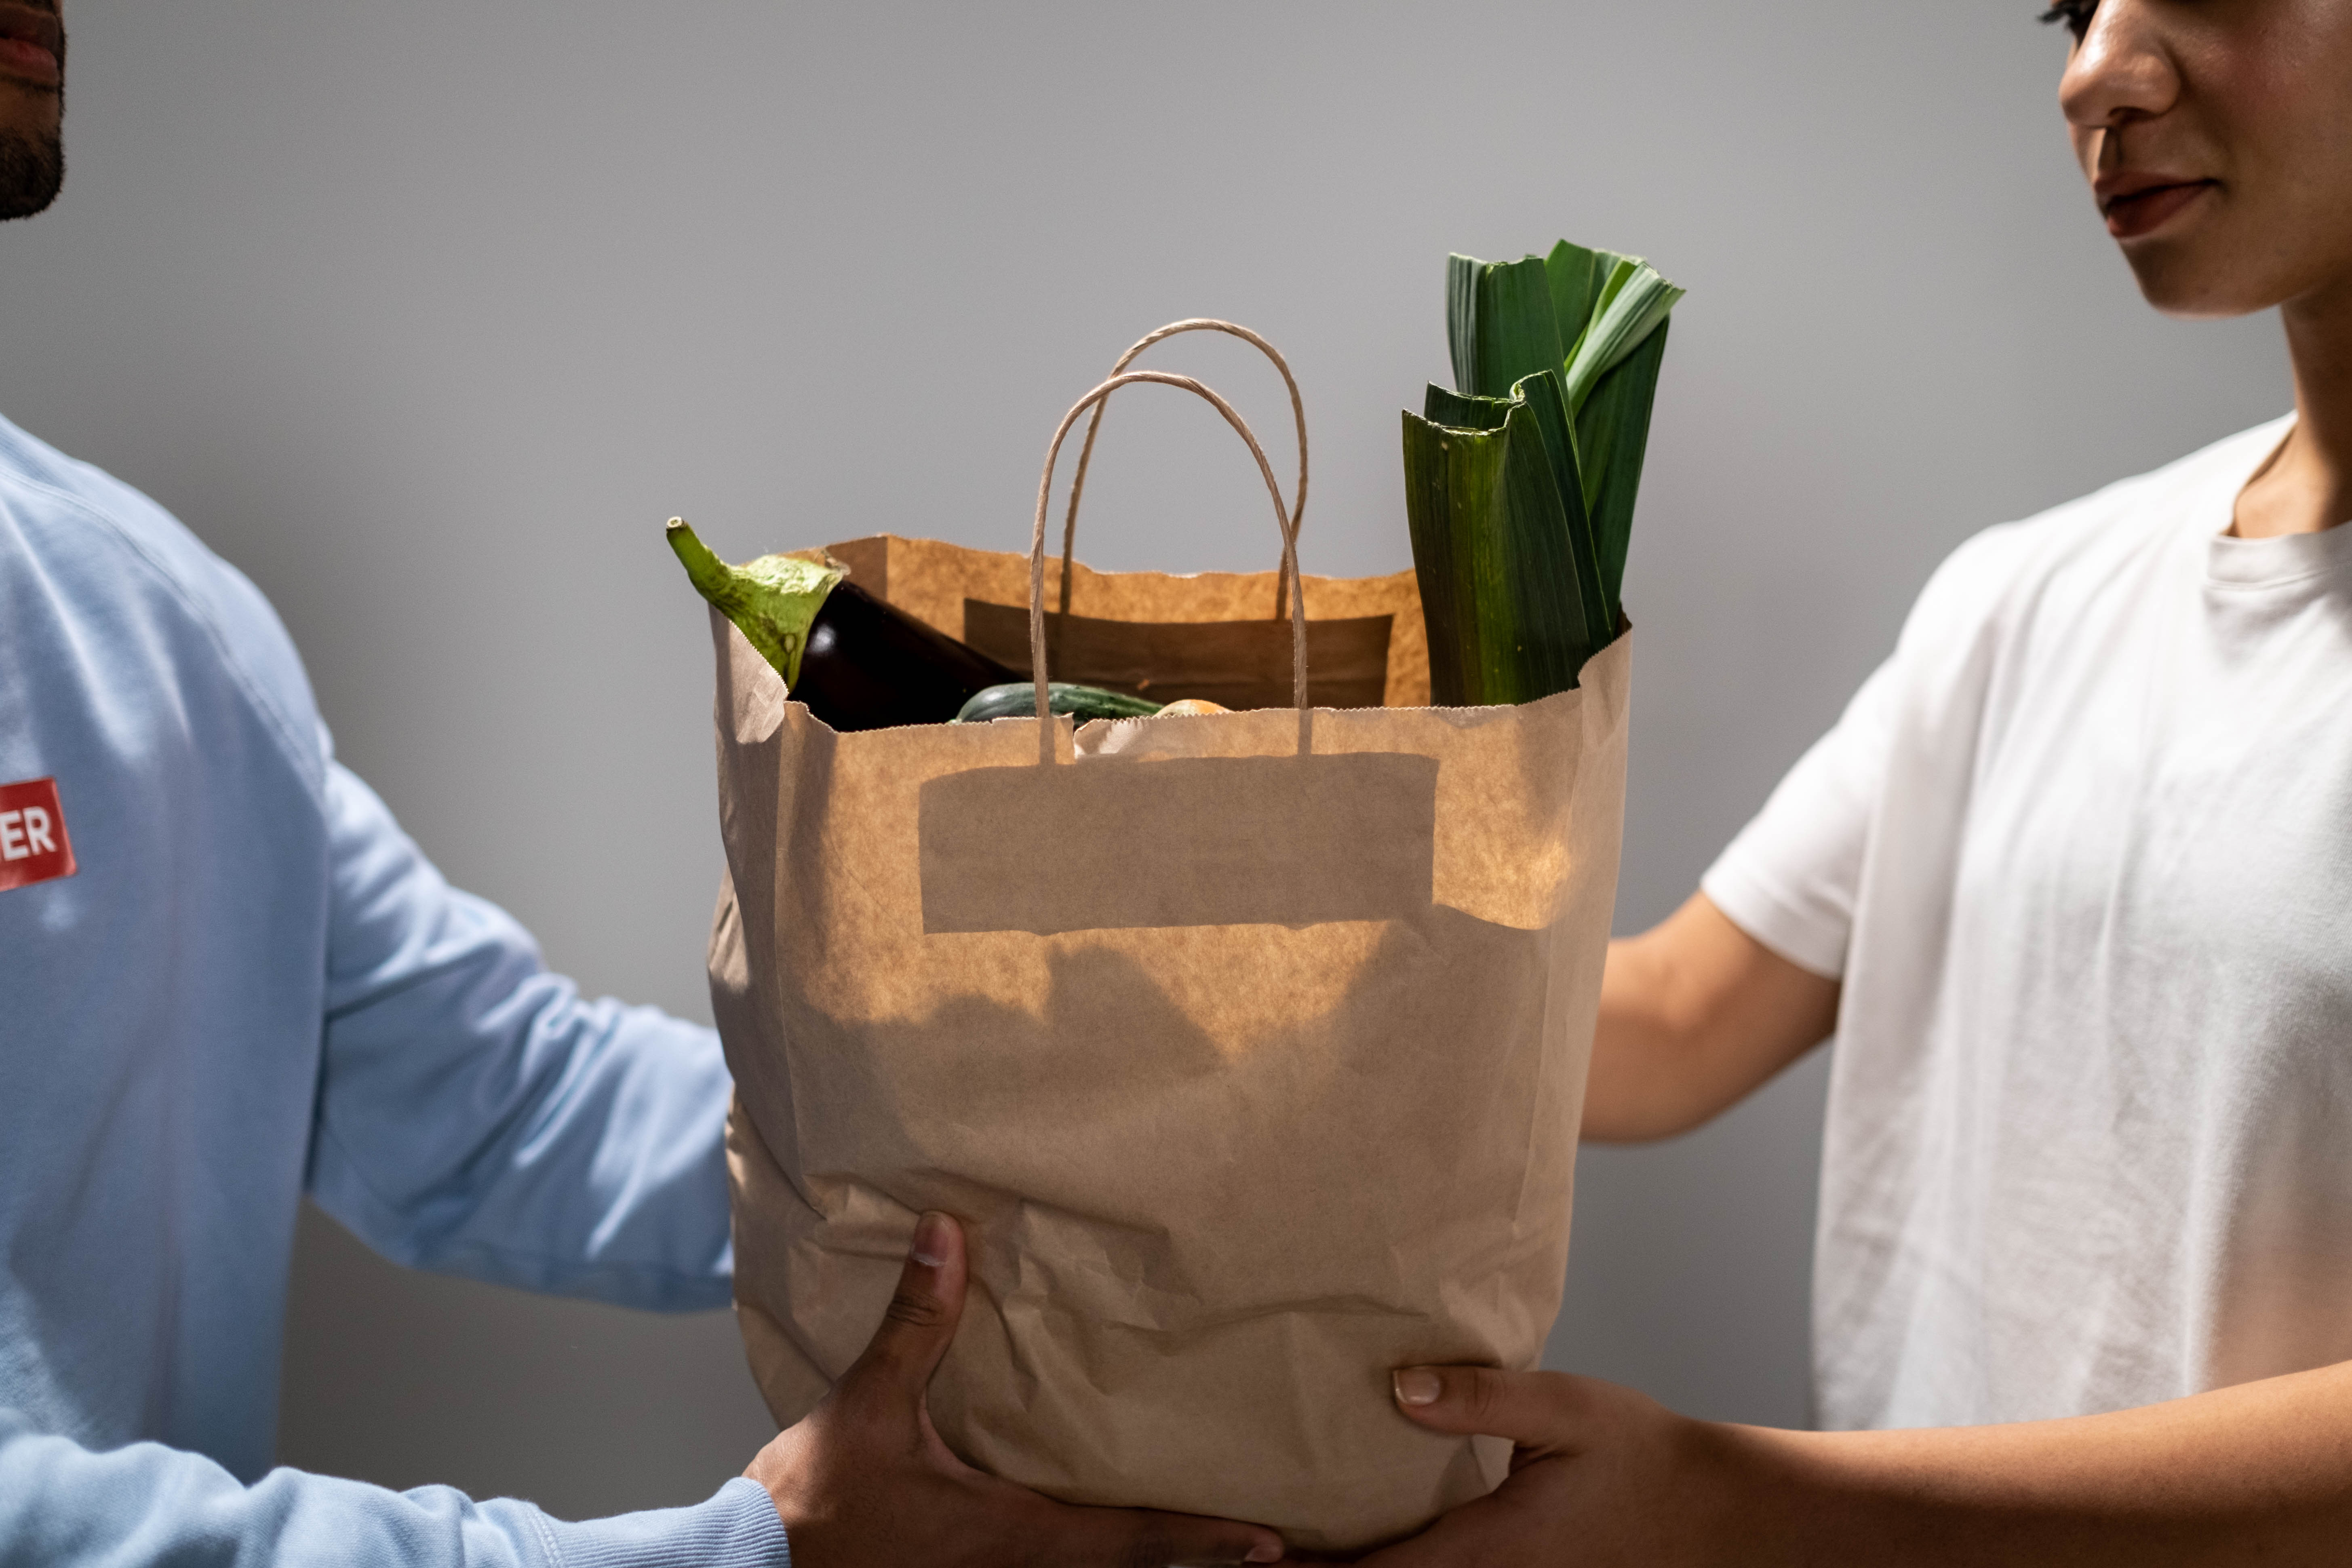 Looking for a Grocery Delivery Service? Here are Your Options